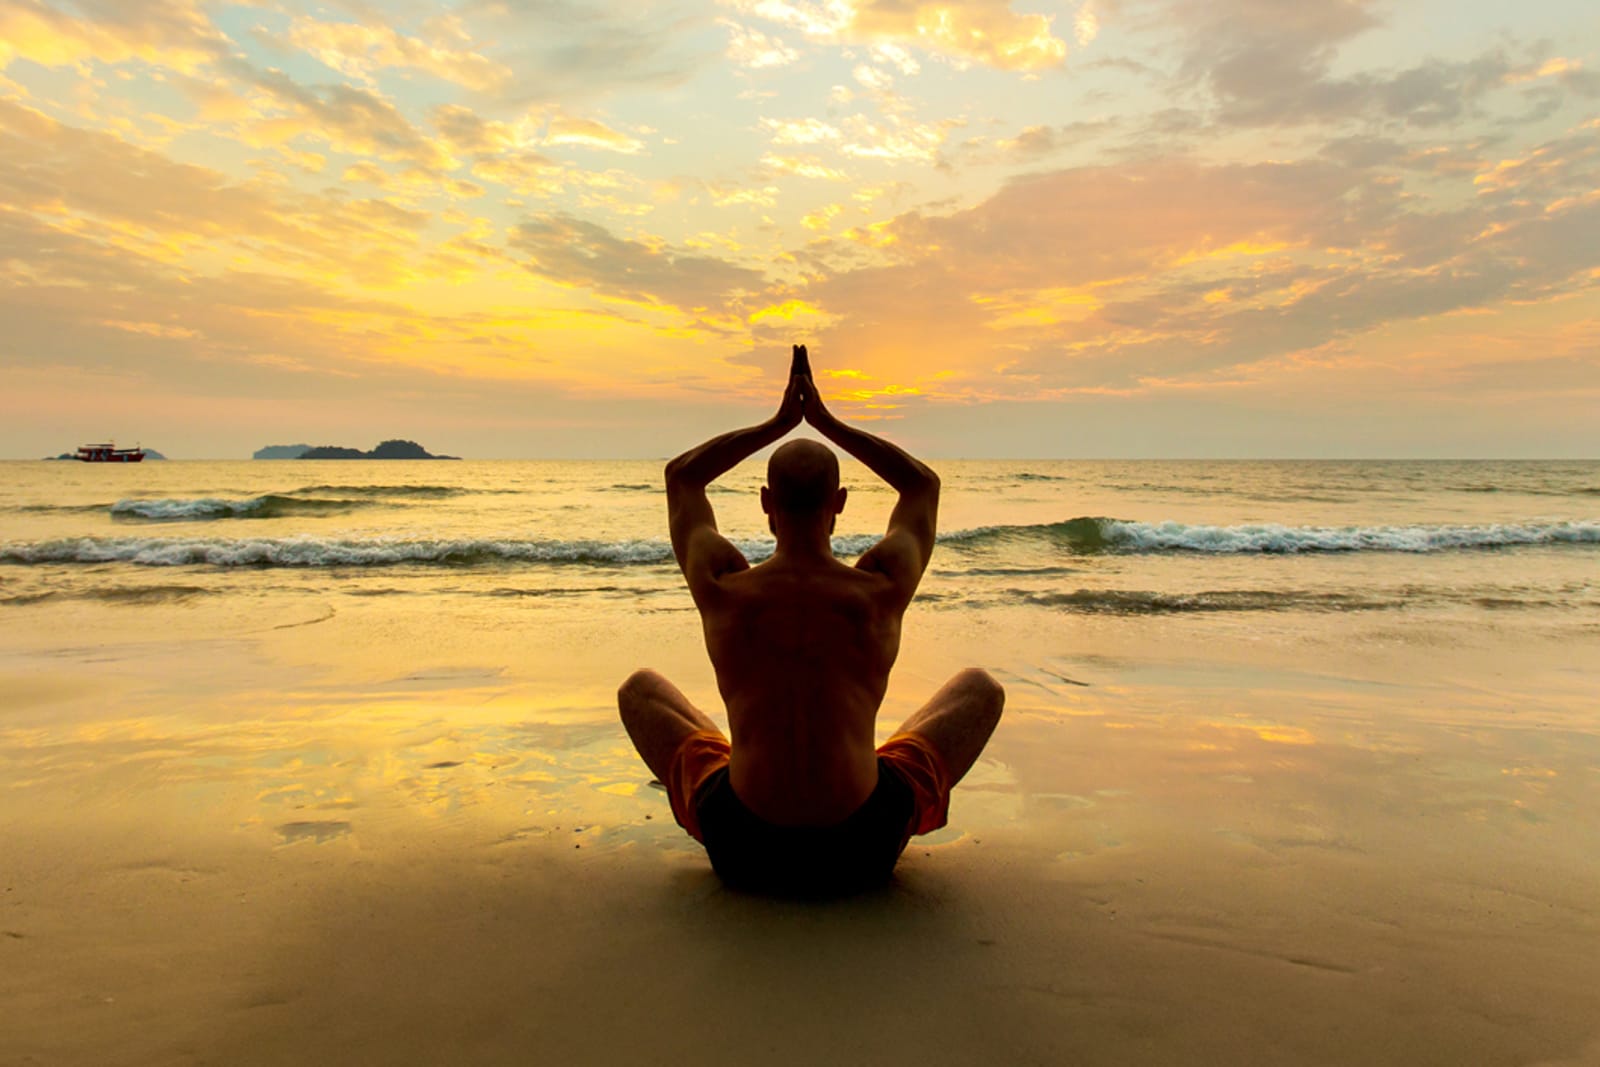 An individual practicing yoga on a beach at sunset